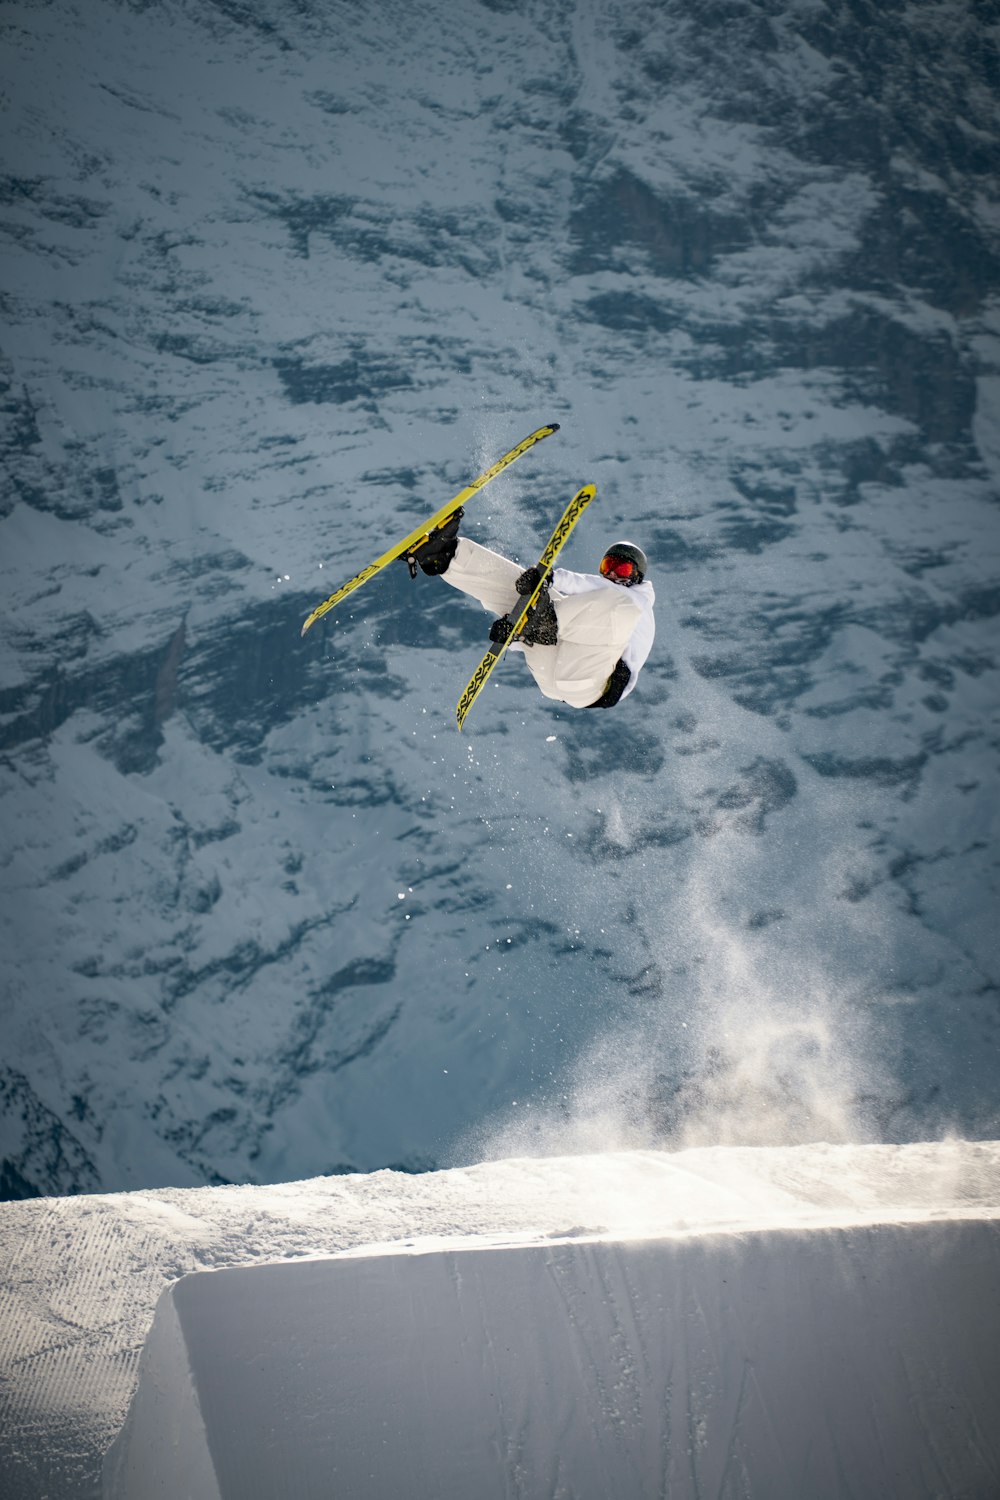 man in white shirt and yellow pants riding on yellow and white snowboard on snow covered